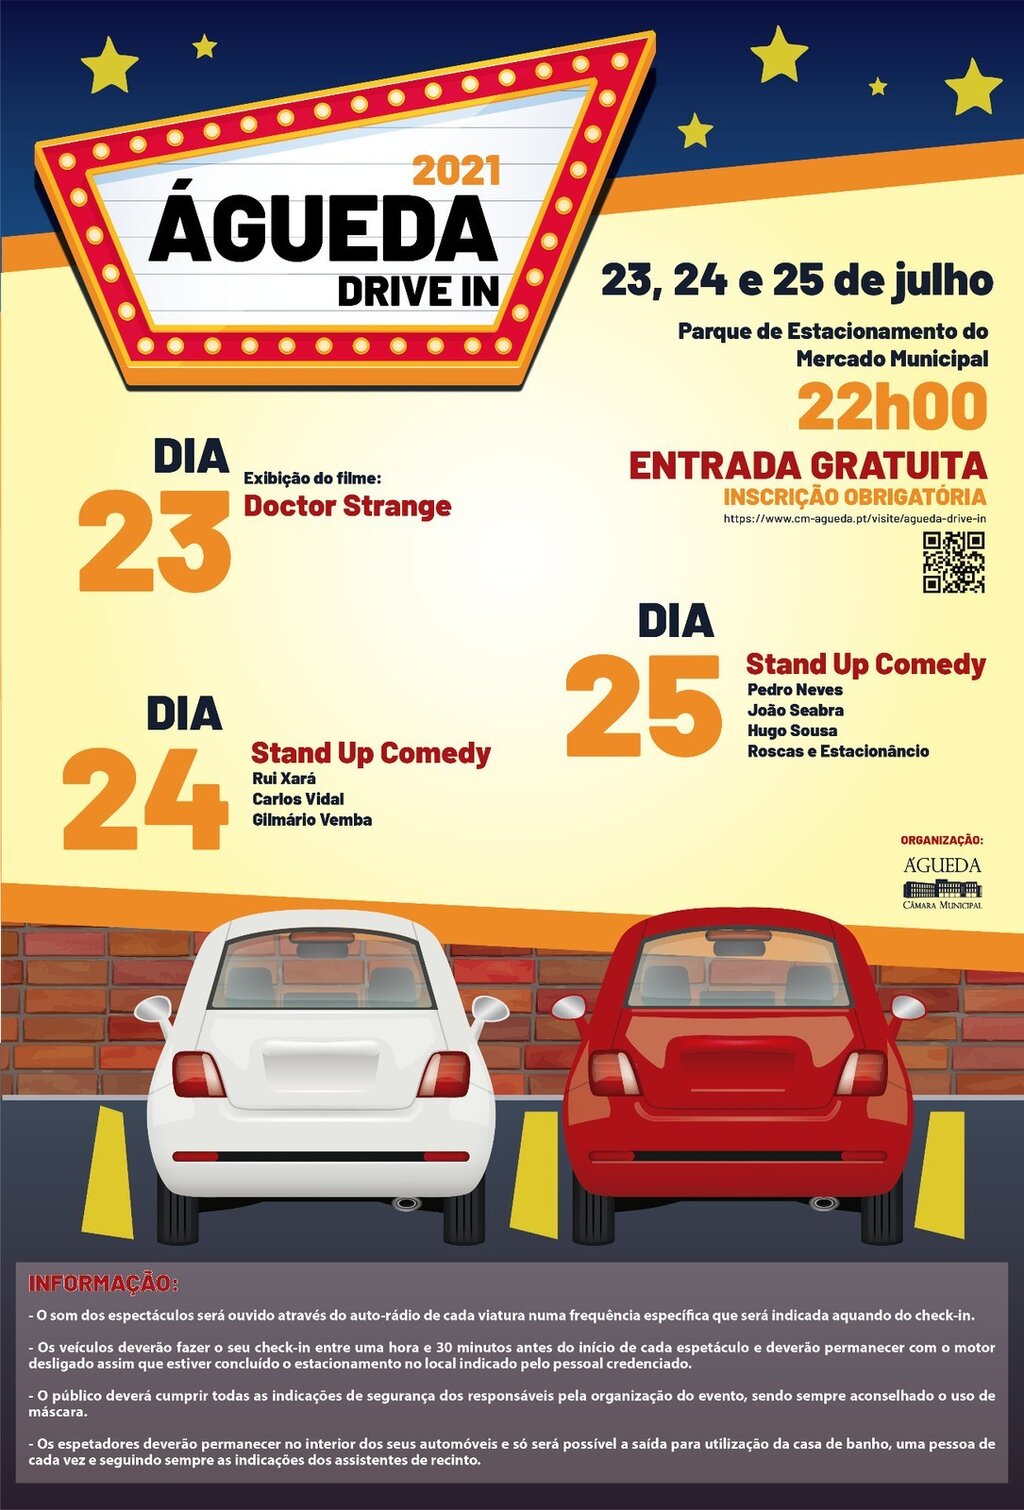 Águeda Drive In